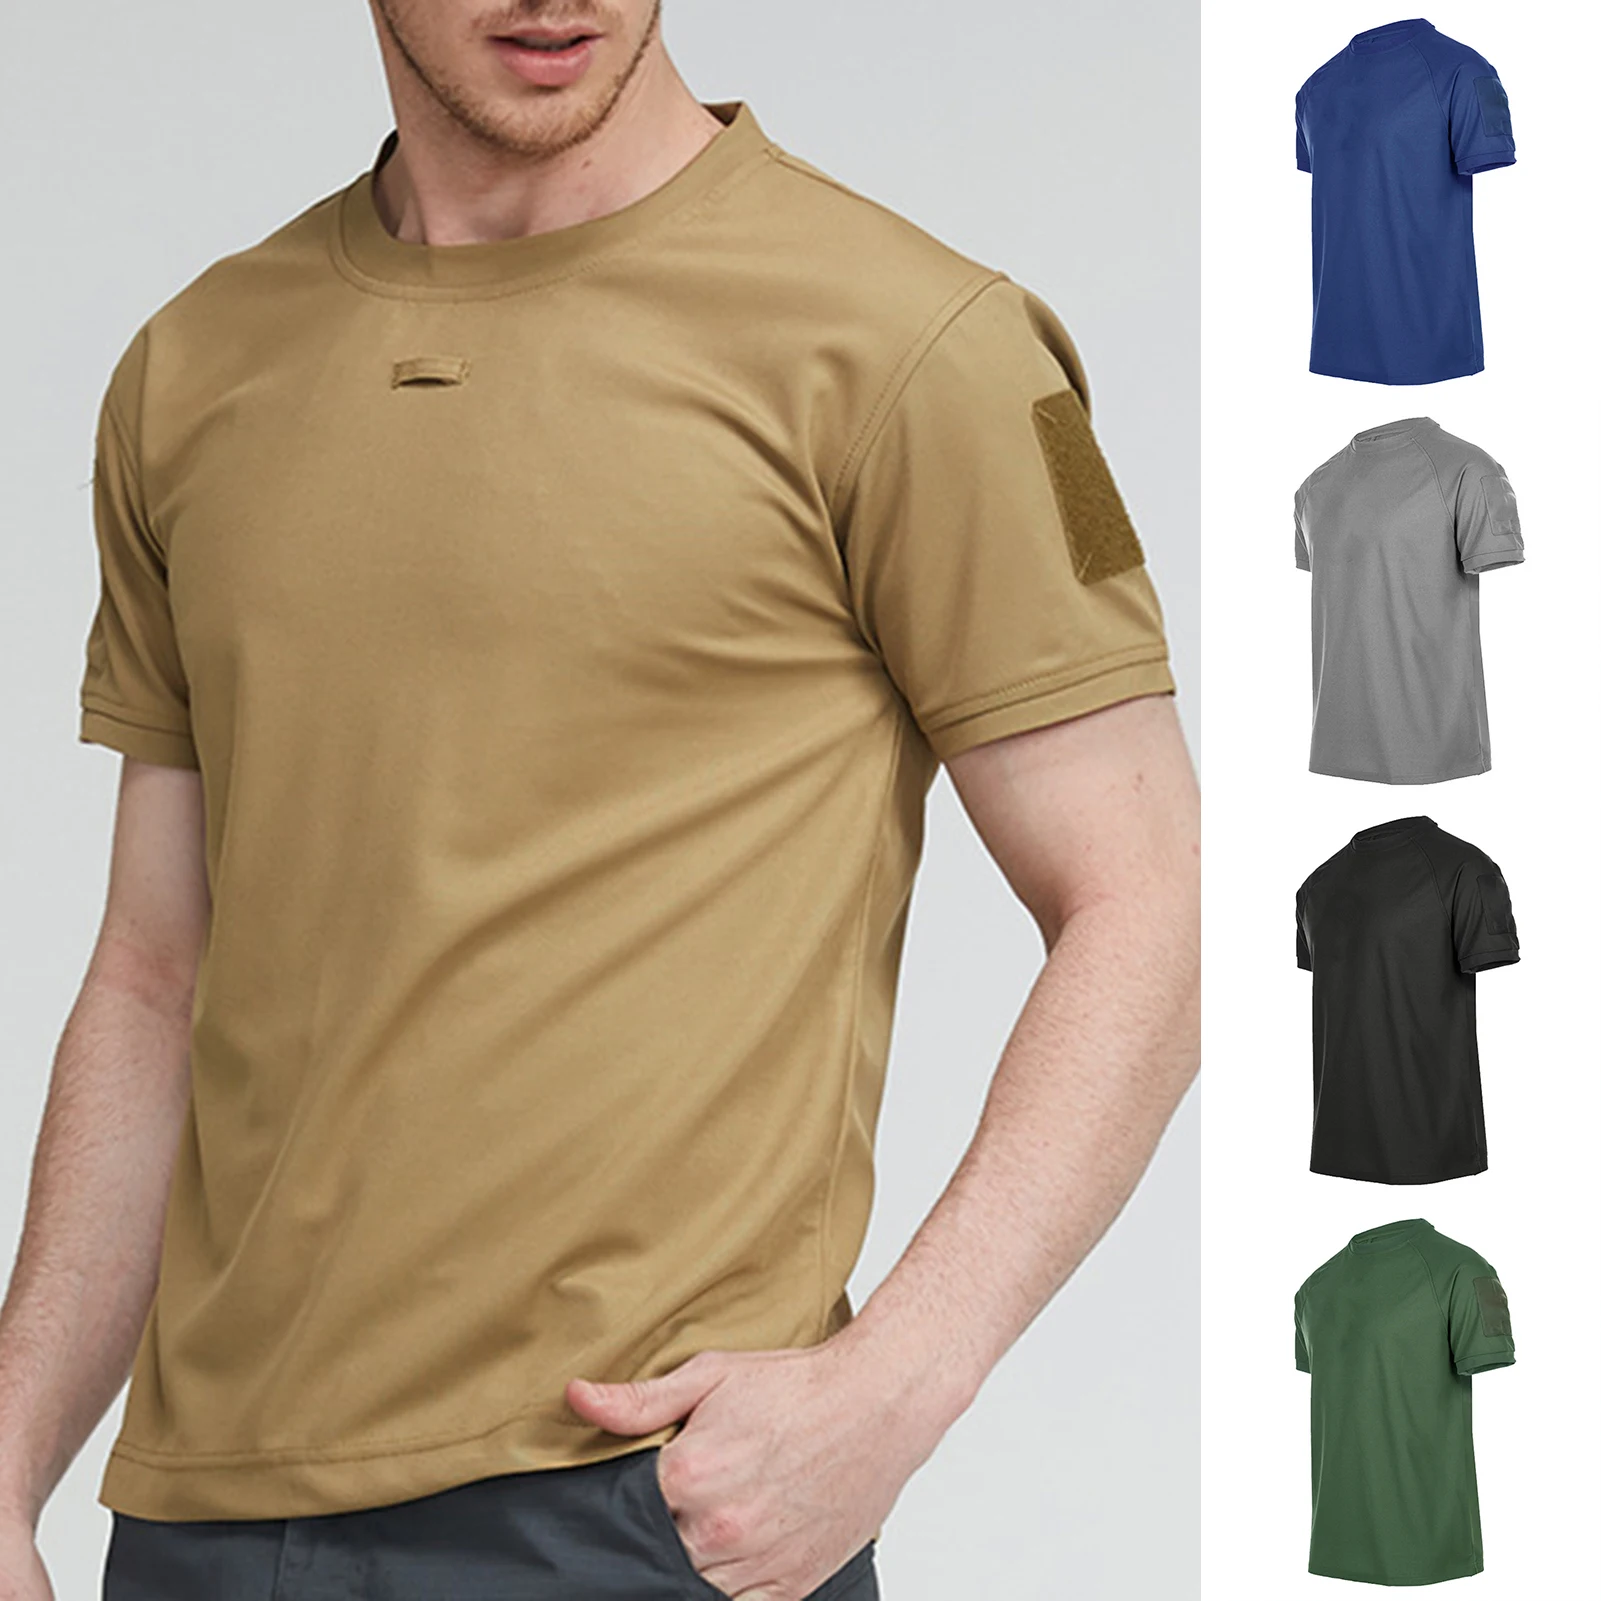 Tactical T-Shirts Men Sport Outdoor Military Tee Quick Dry Short Sleeve Shirt Hiking Hunting Army Combat Men Clothing Breathable